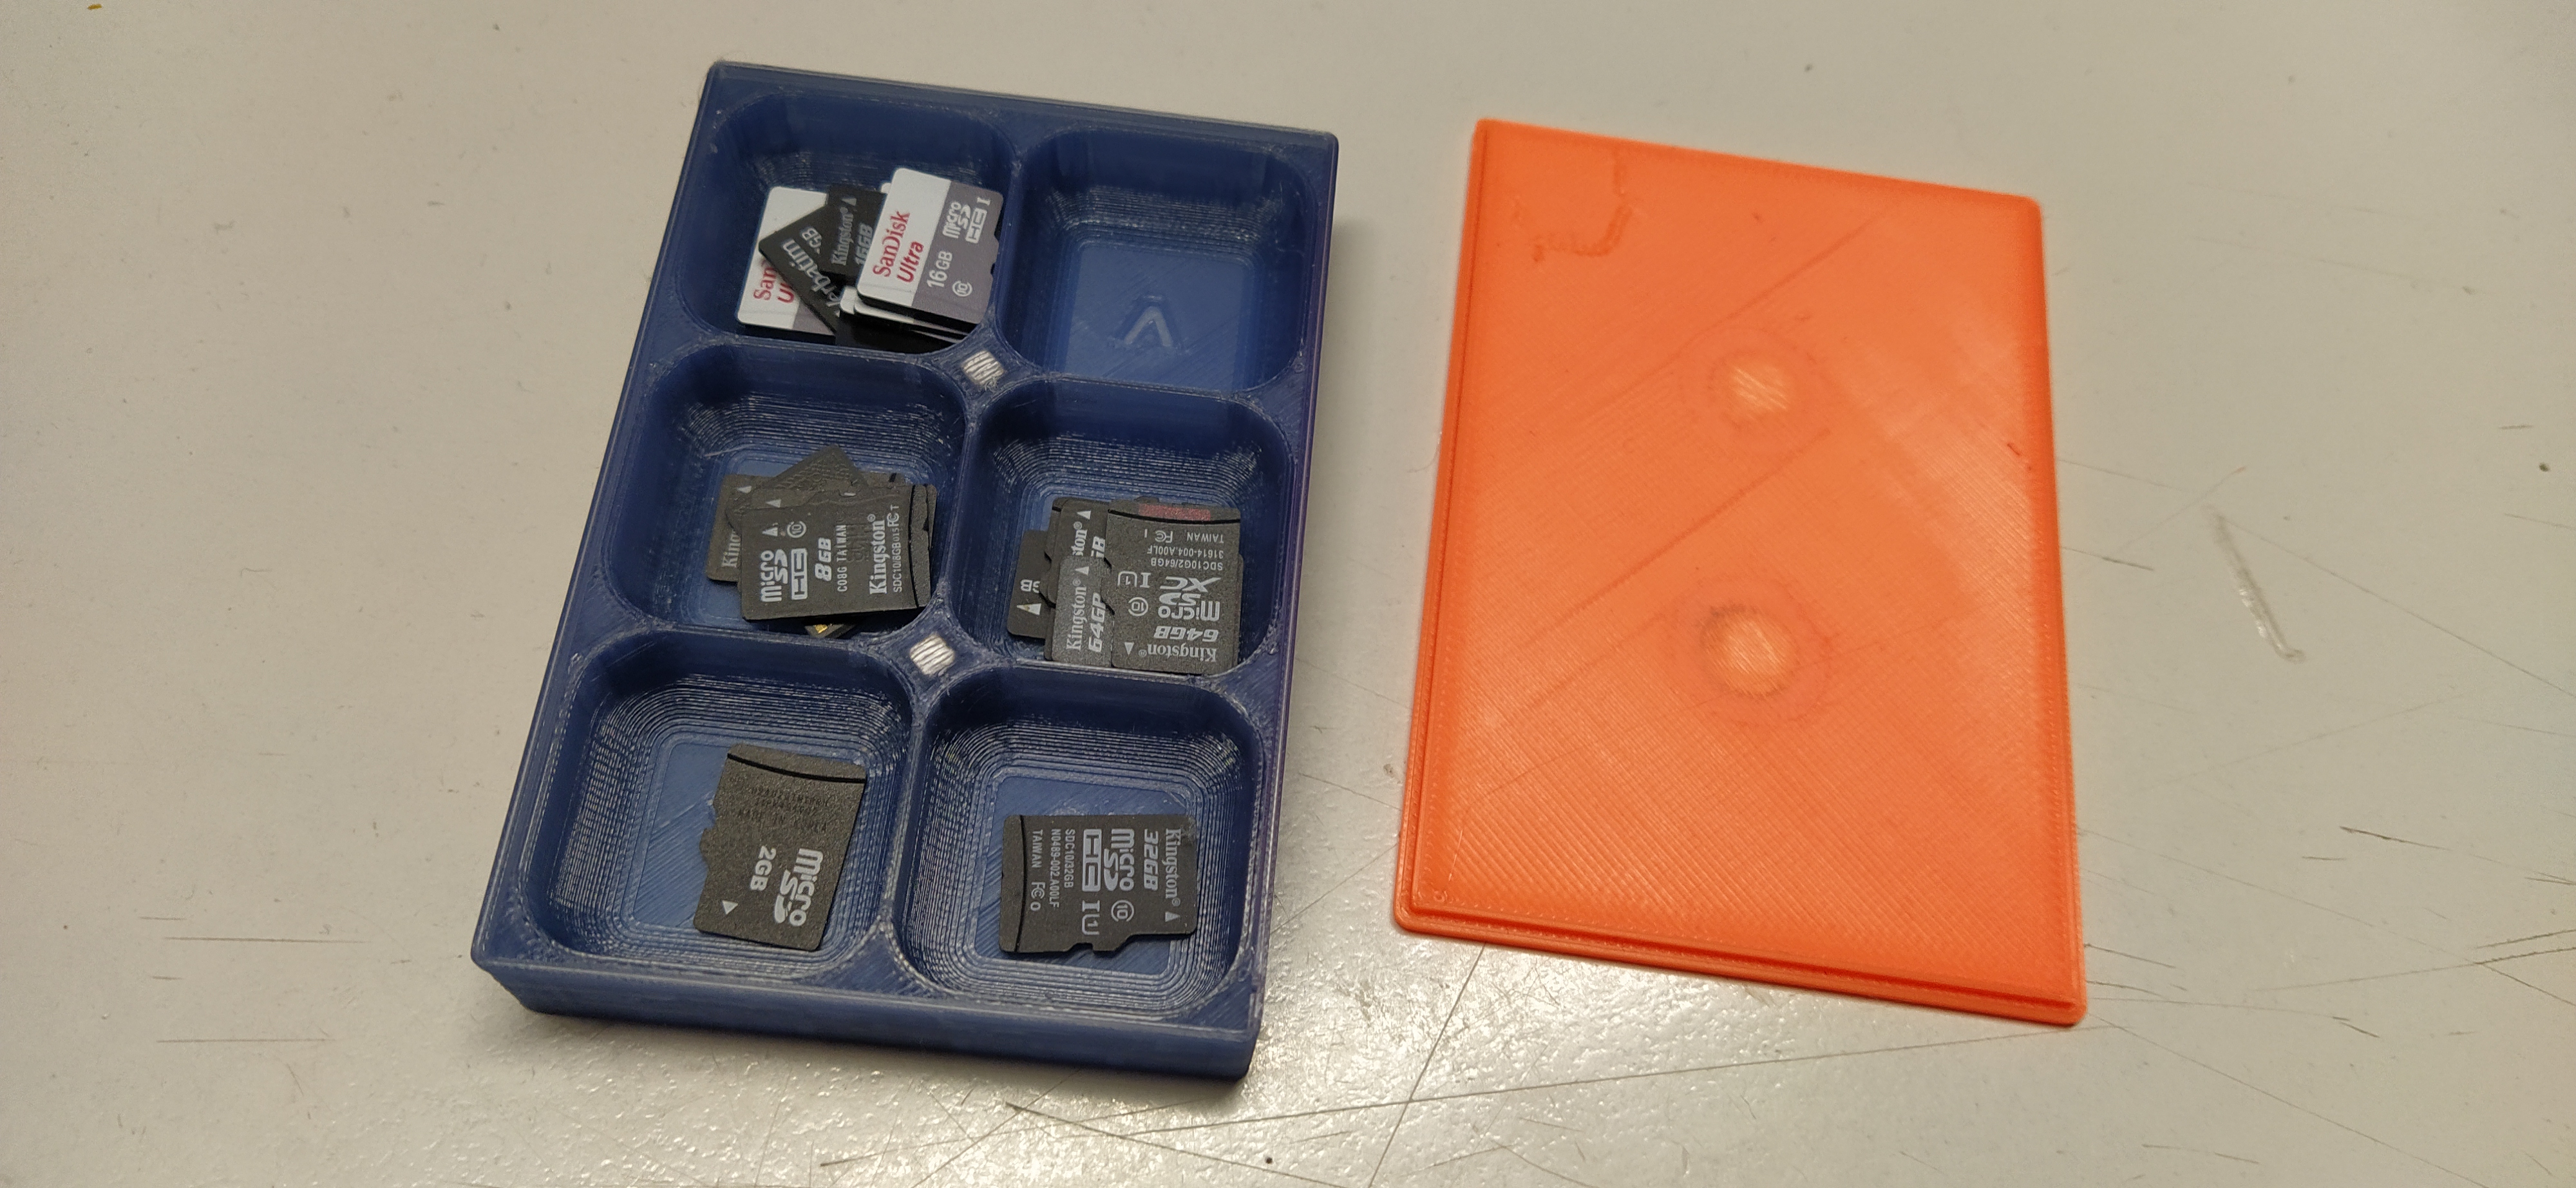 PaCoBox: Parametric Compartmentalized Box for SD cards and other things